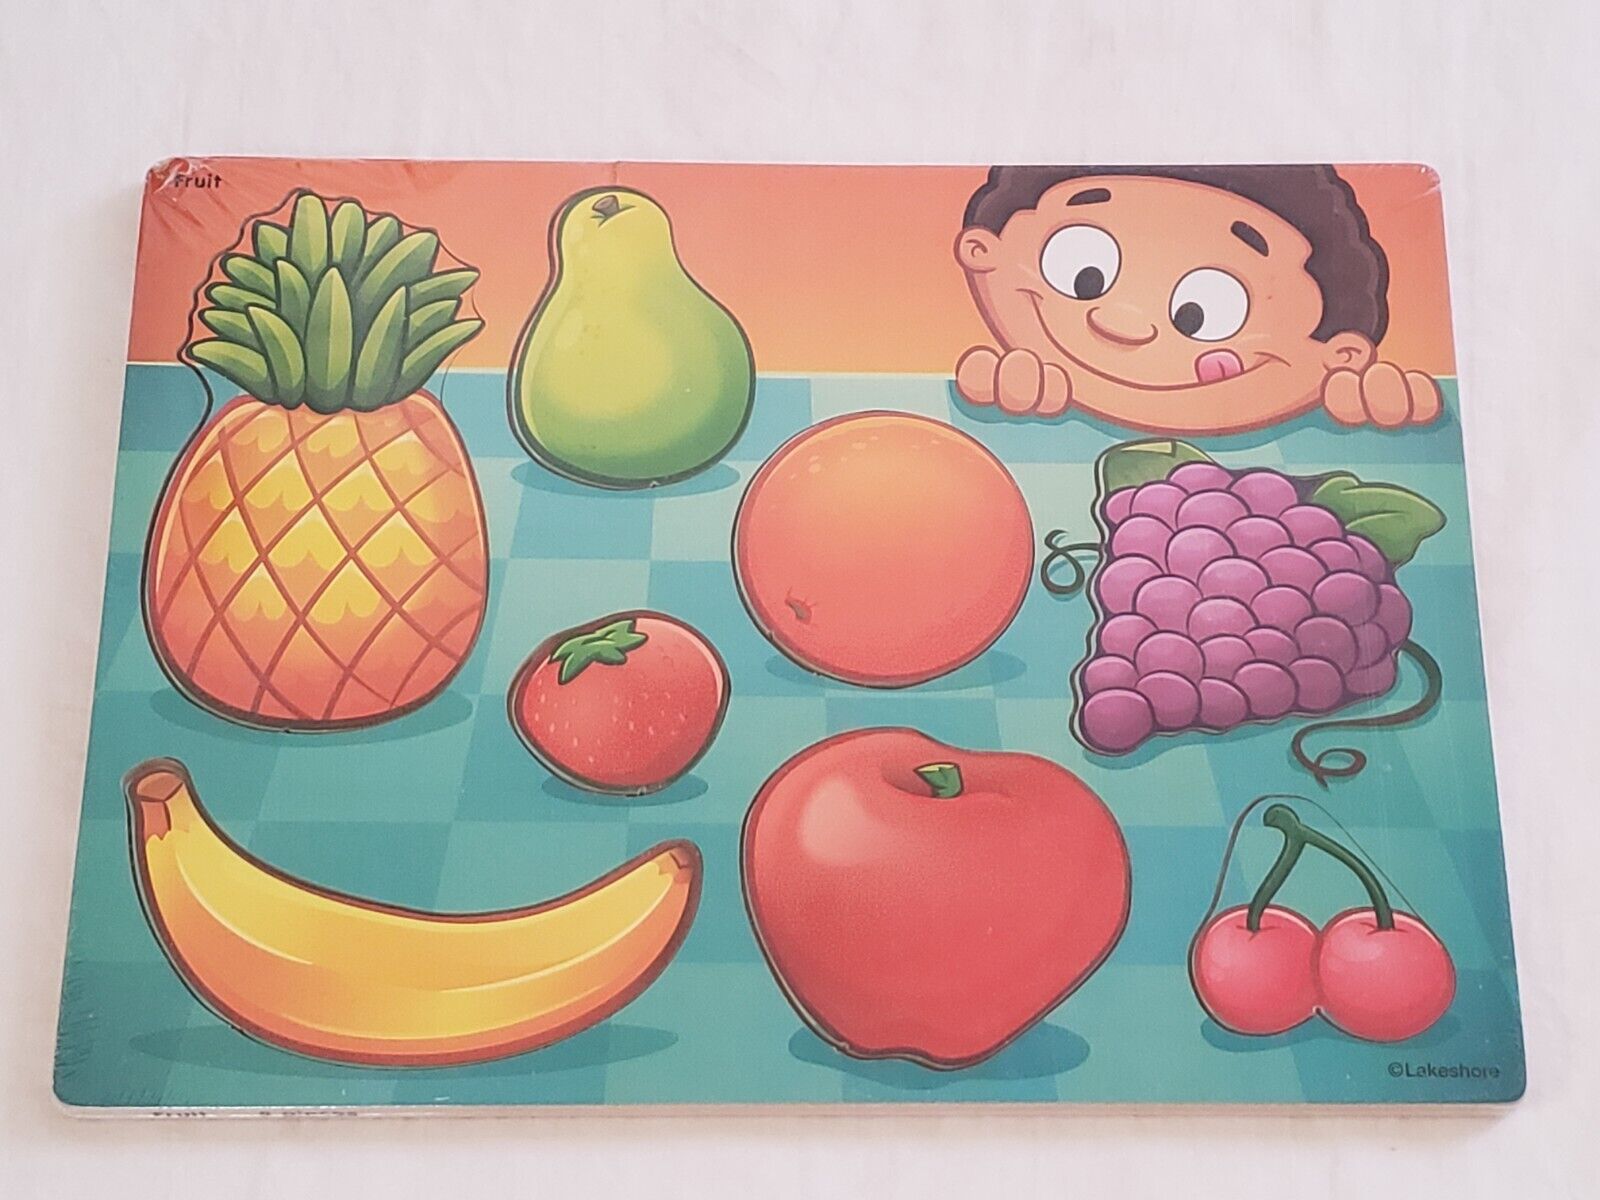 Vintage Lakeshore Learning wooden wood puzzle - Fruit - 8 pieces